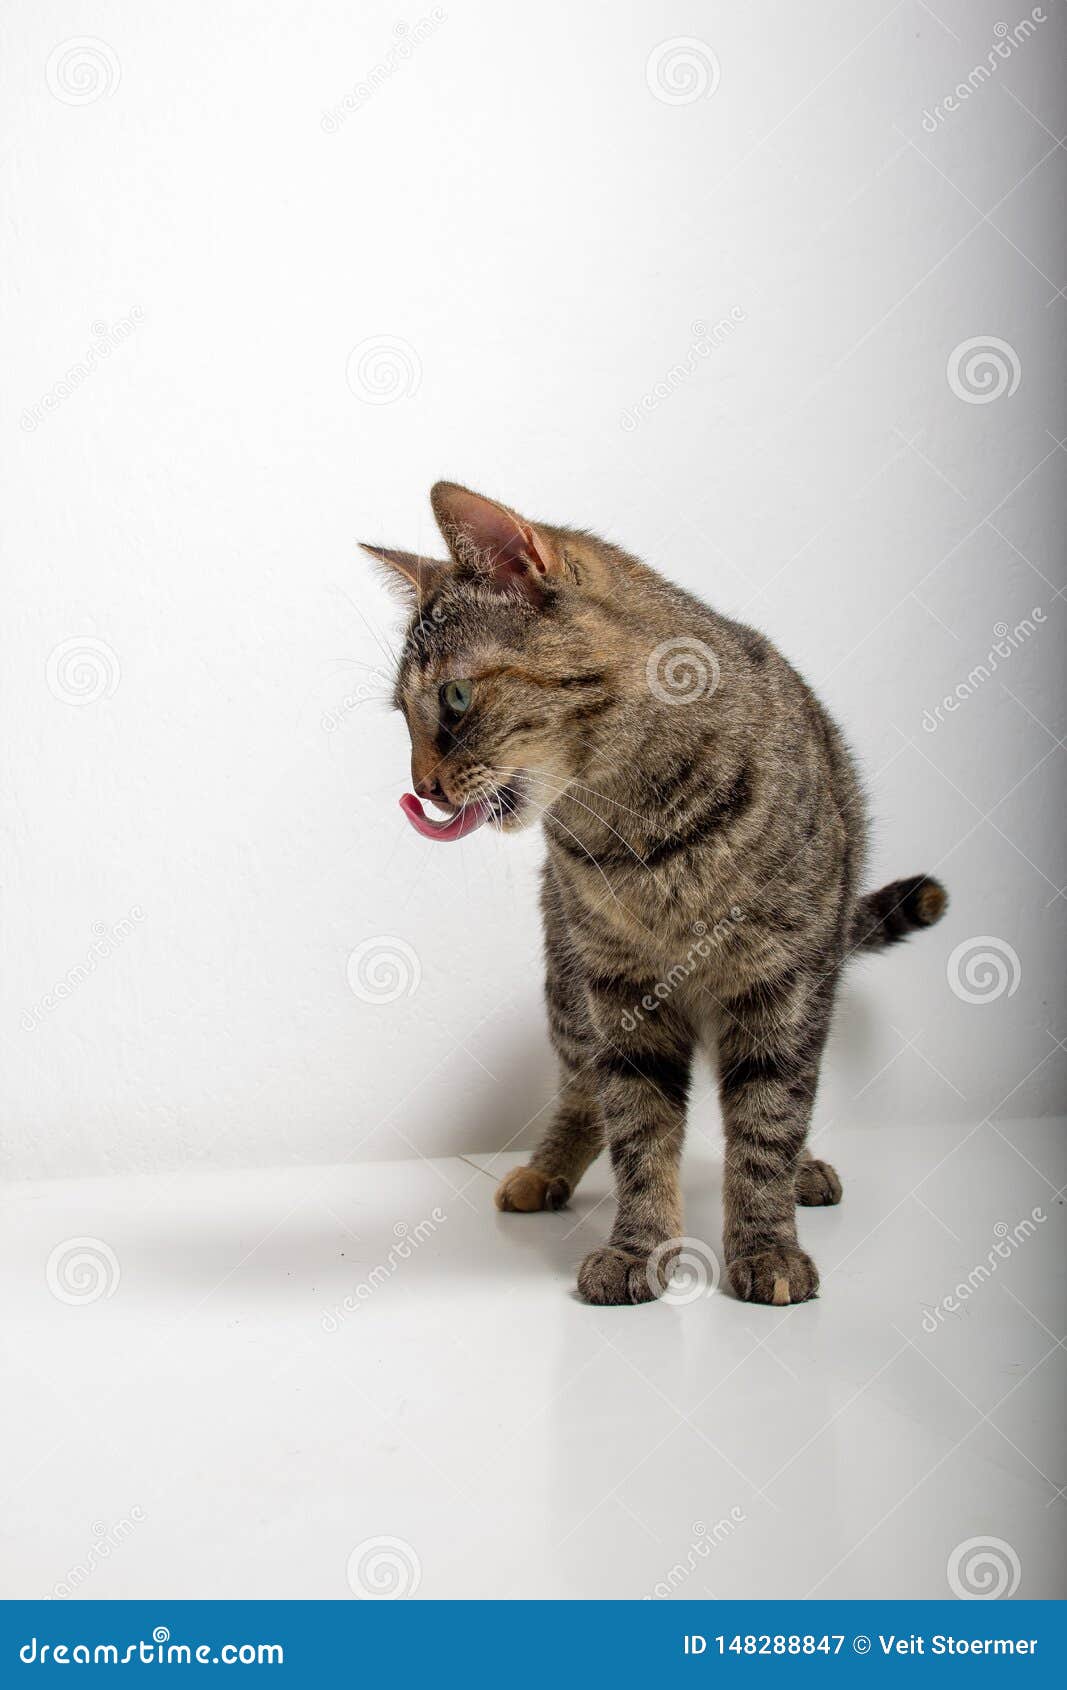 Gray tabby cat is watching something with tongue outstretched